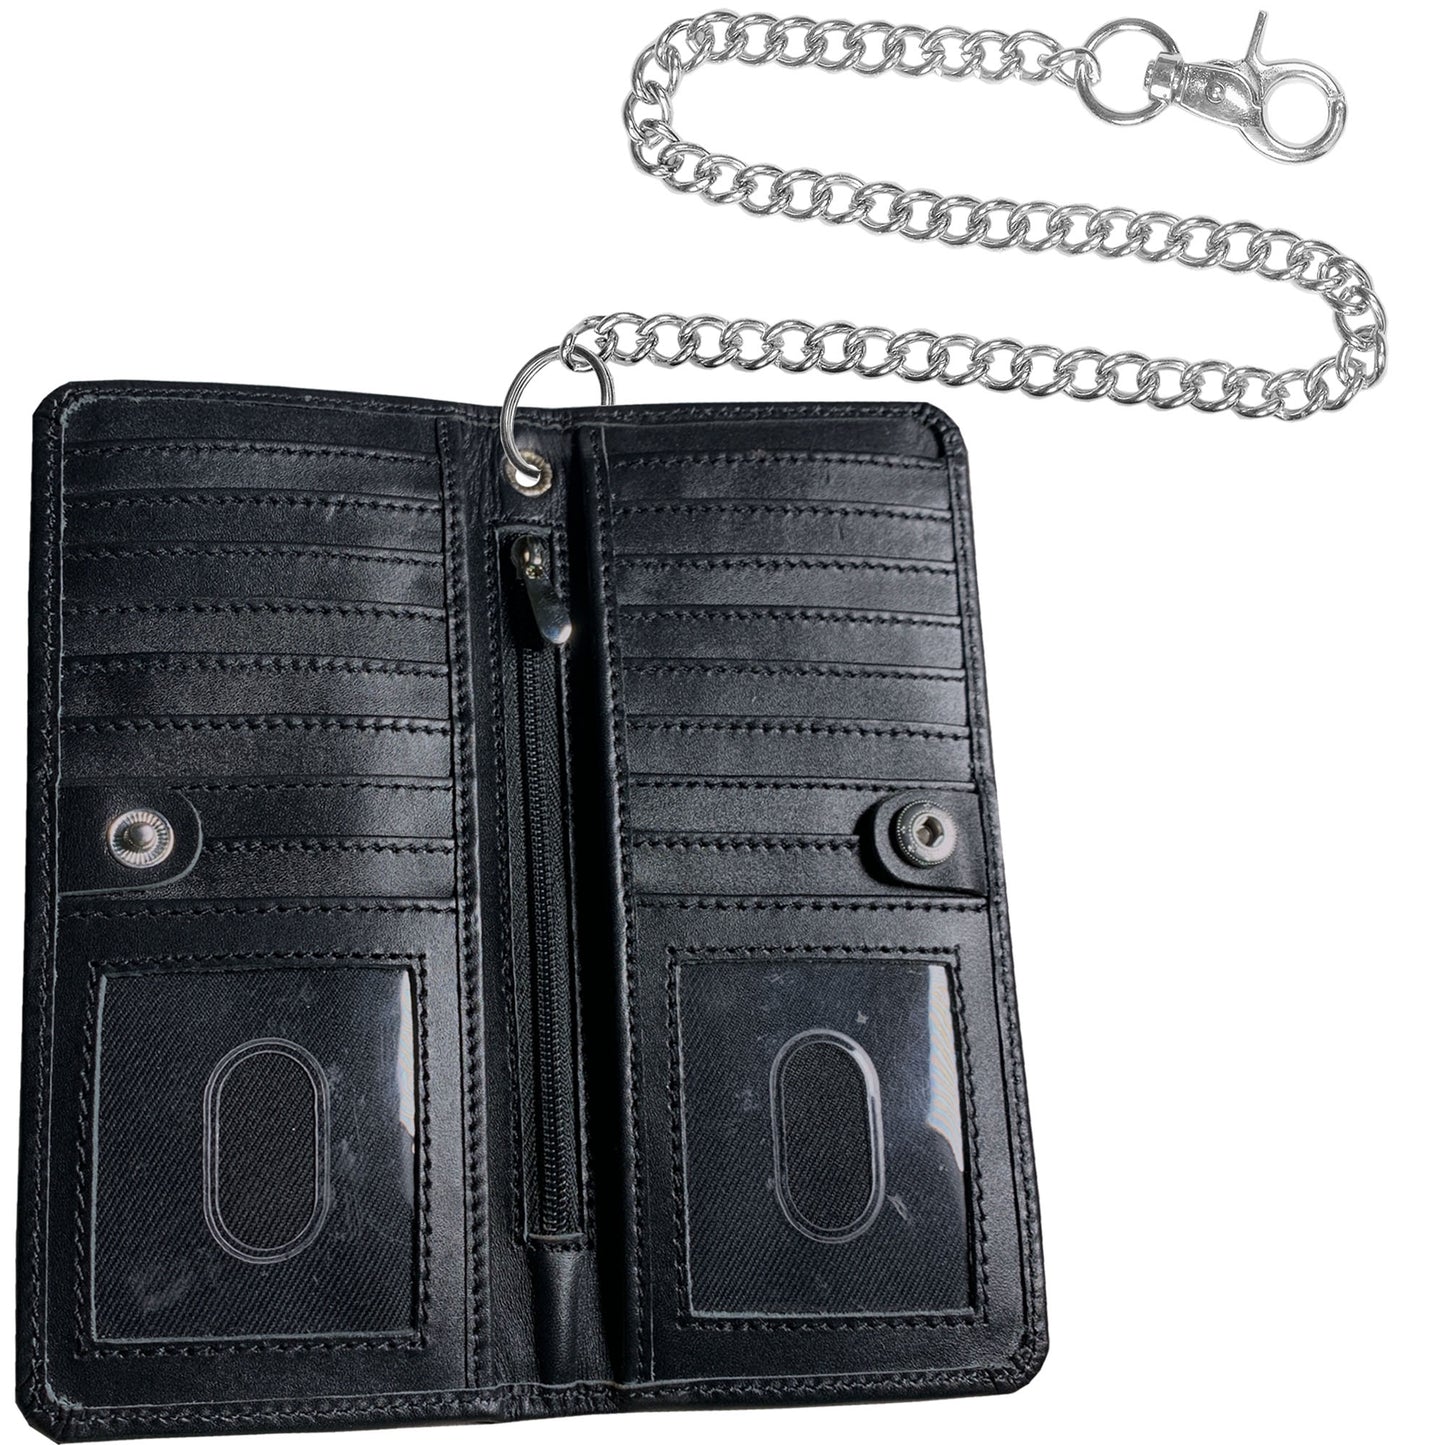 IBRO Long Bifold RFID Blocking Motorcycle Chain Wallet for Men Ostrich Black